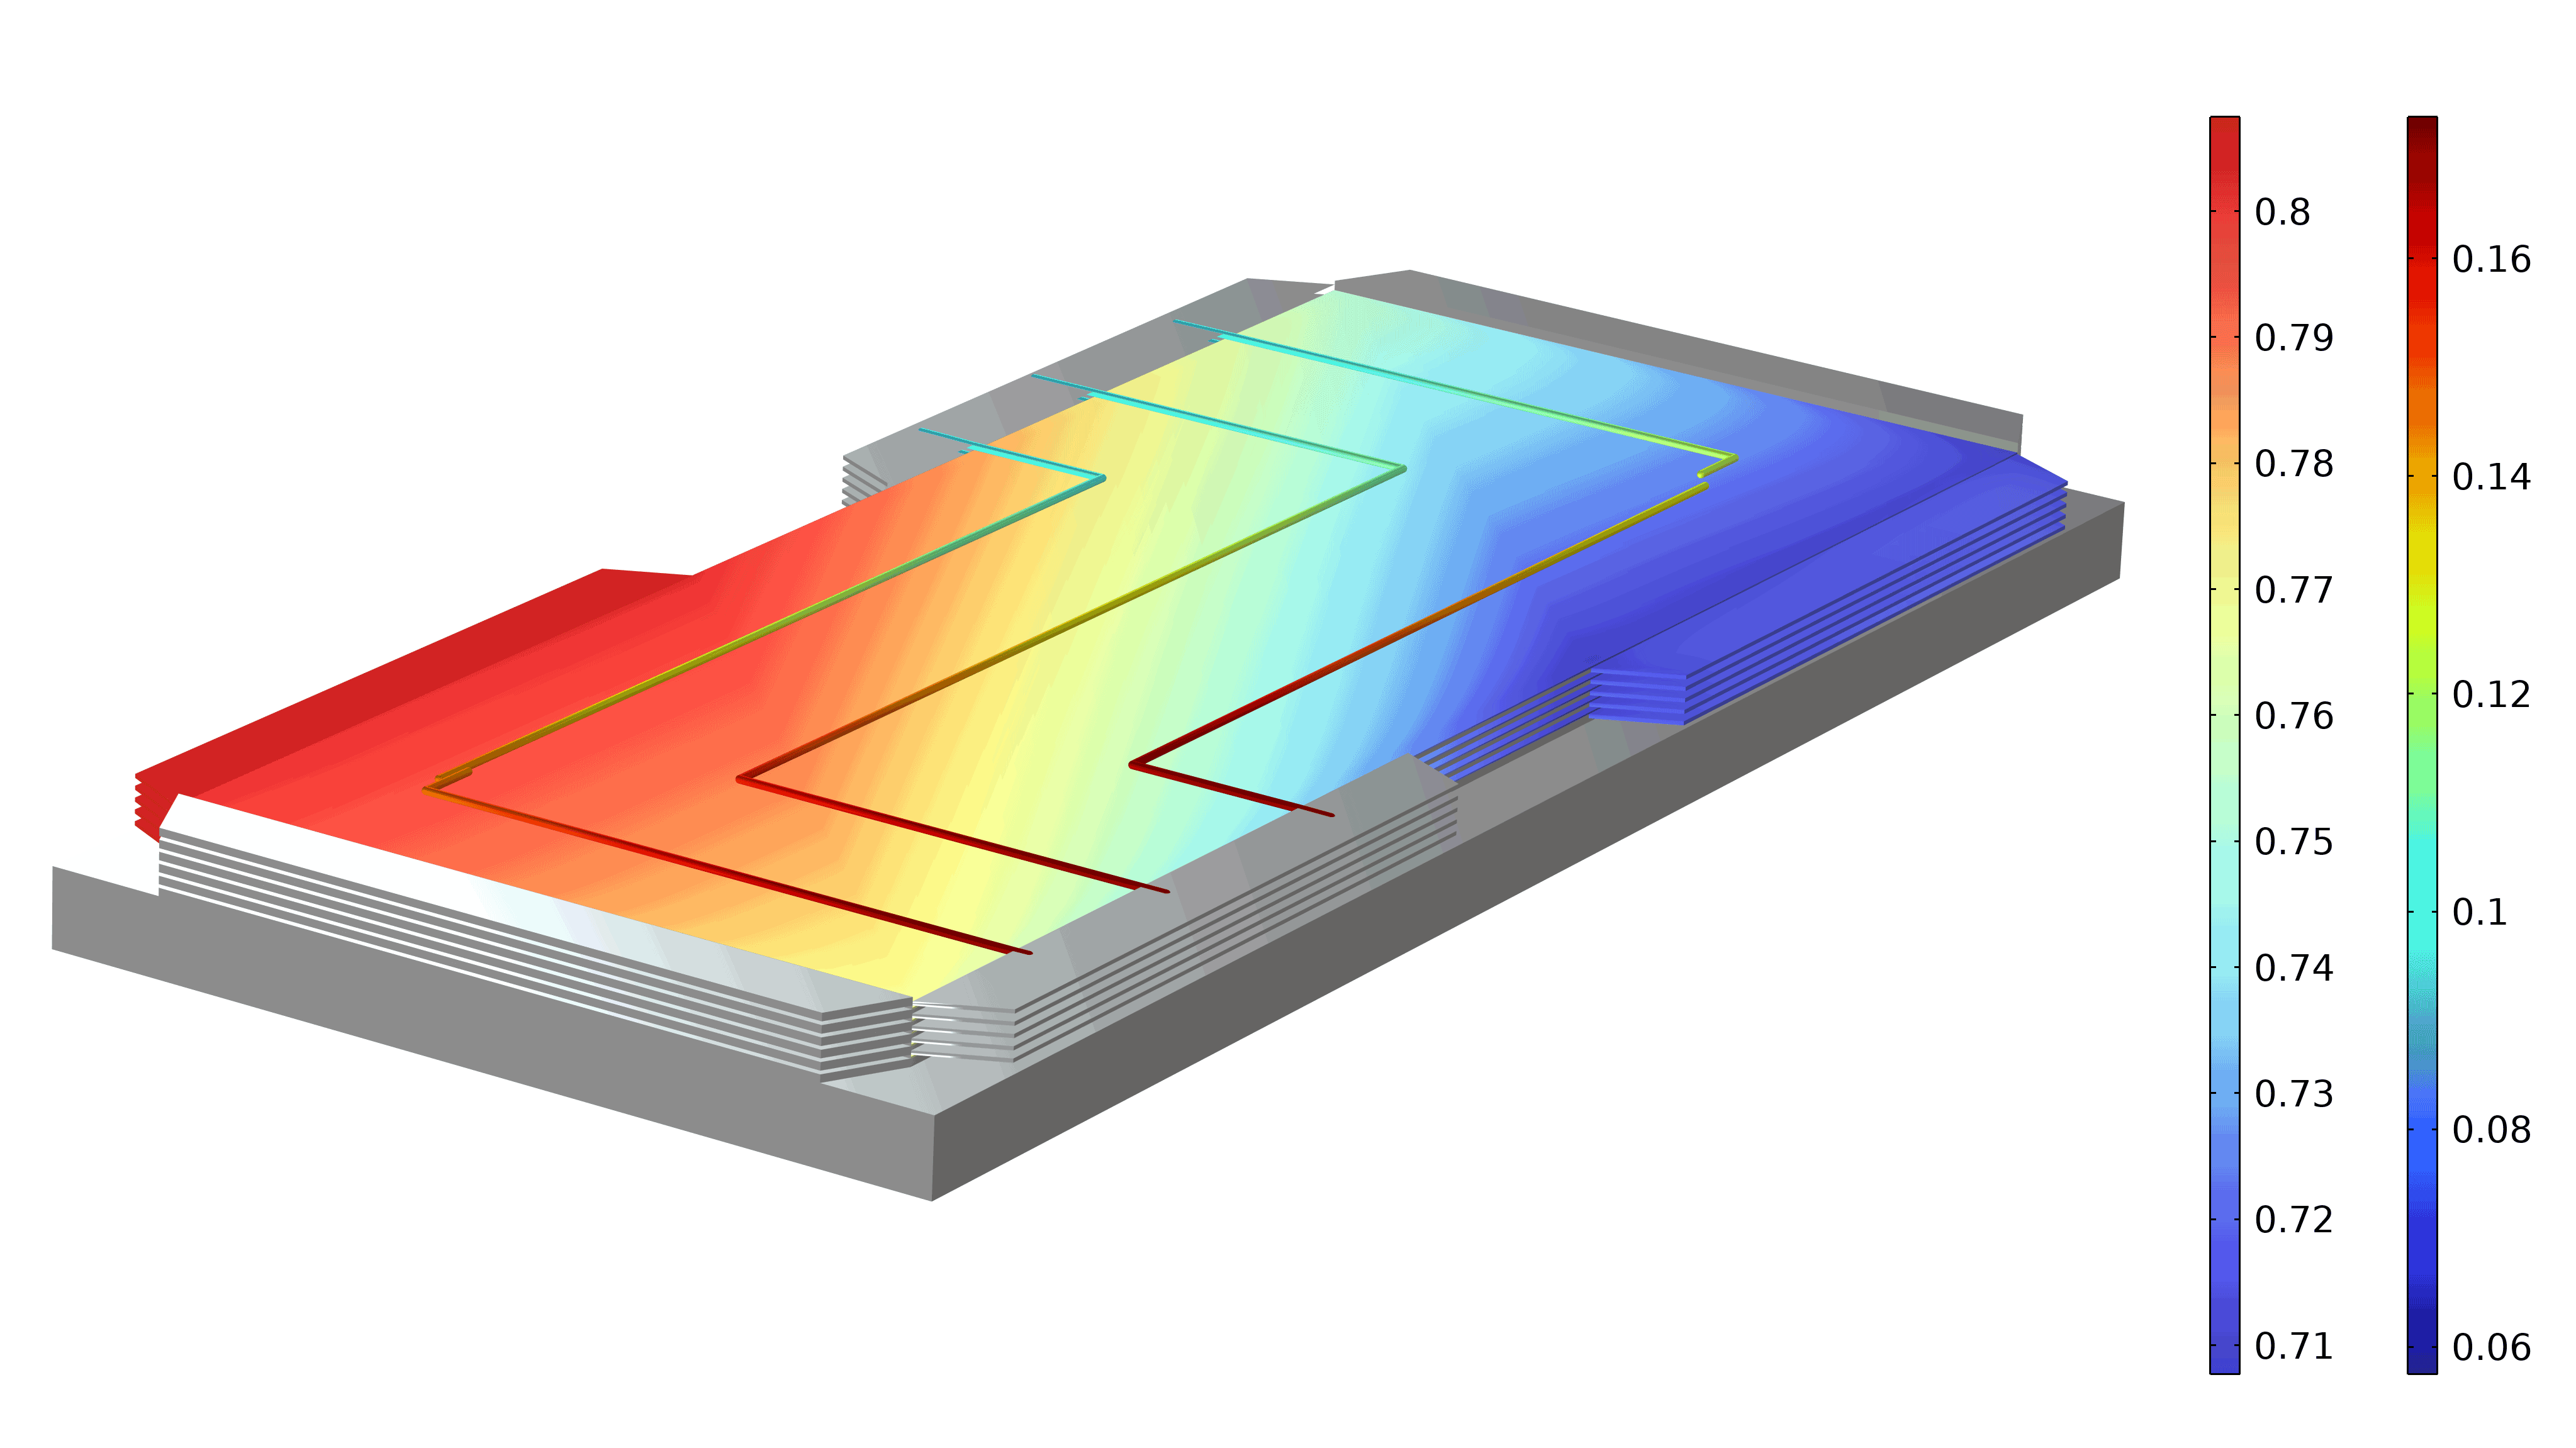 A fuel cell stack cooling model in the Rainbow color table.